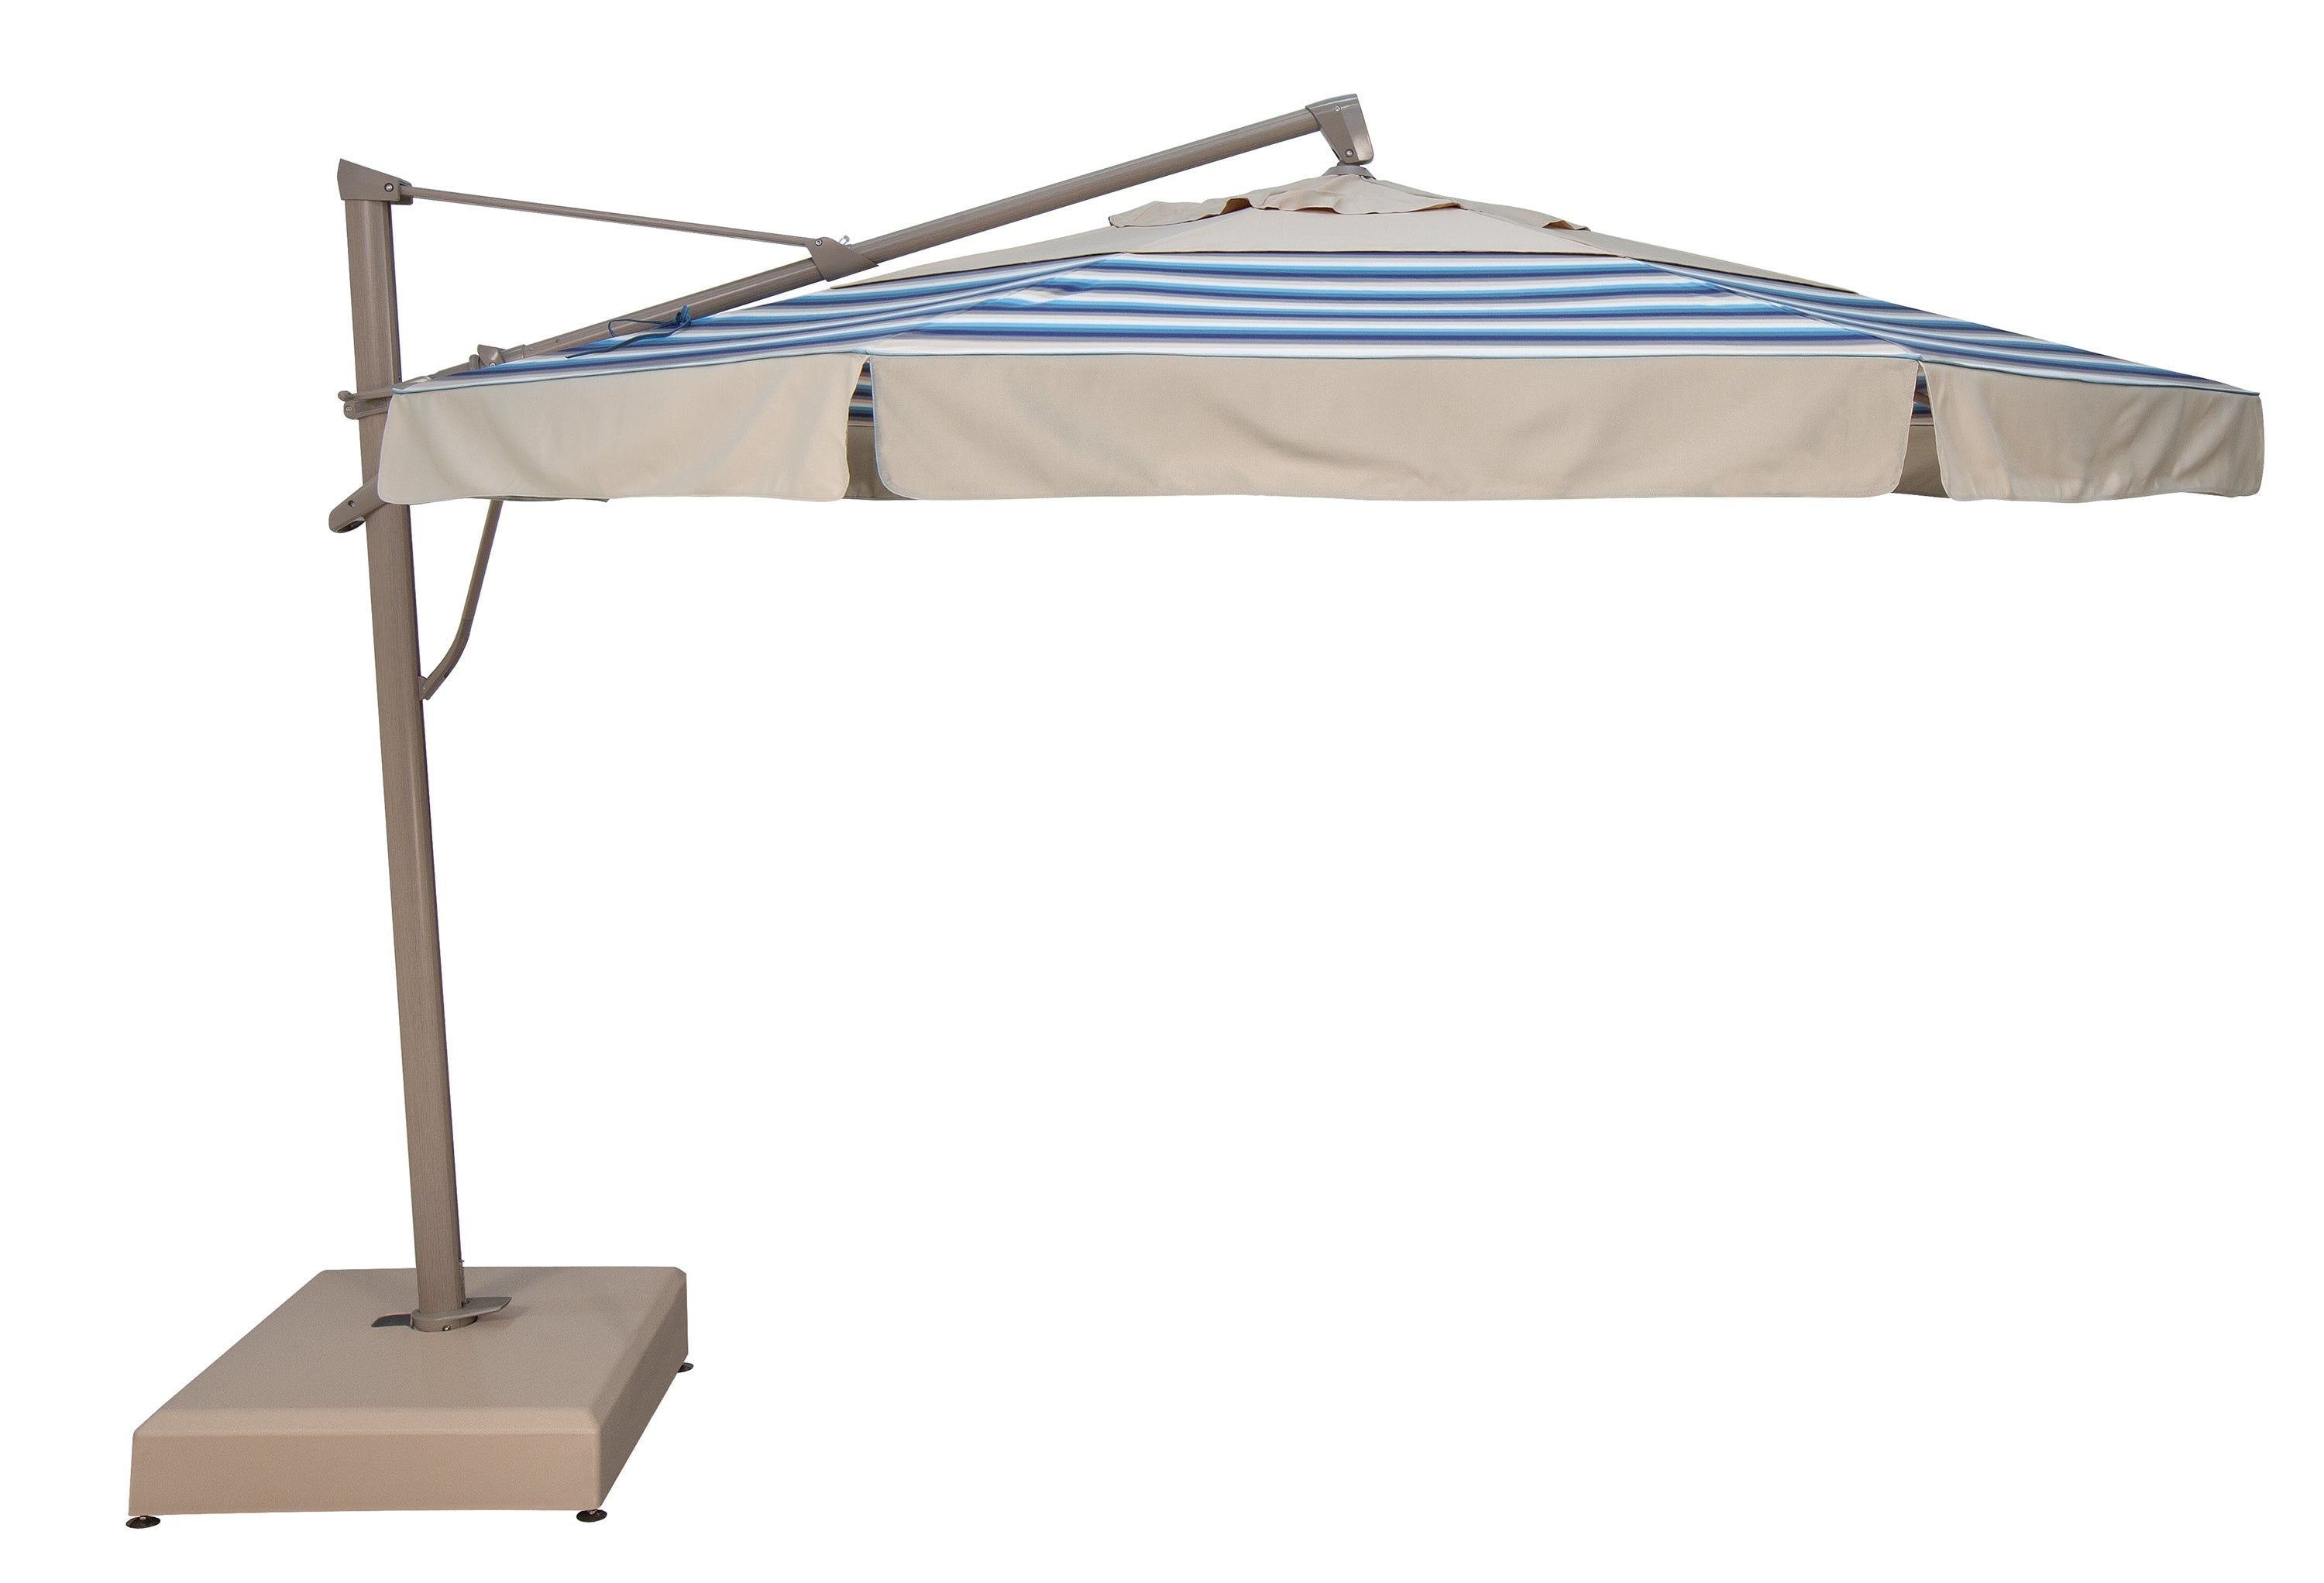 13' AKZ PLUS - Octagonal Cantilever Umbrella With Valance